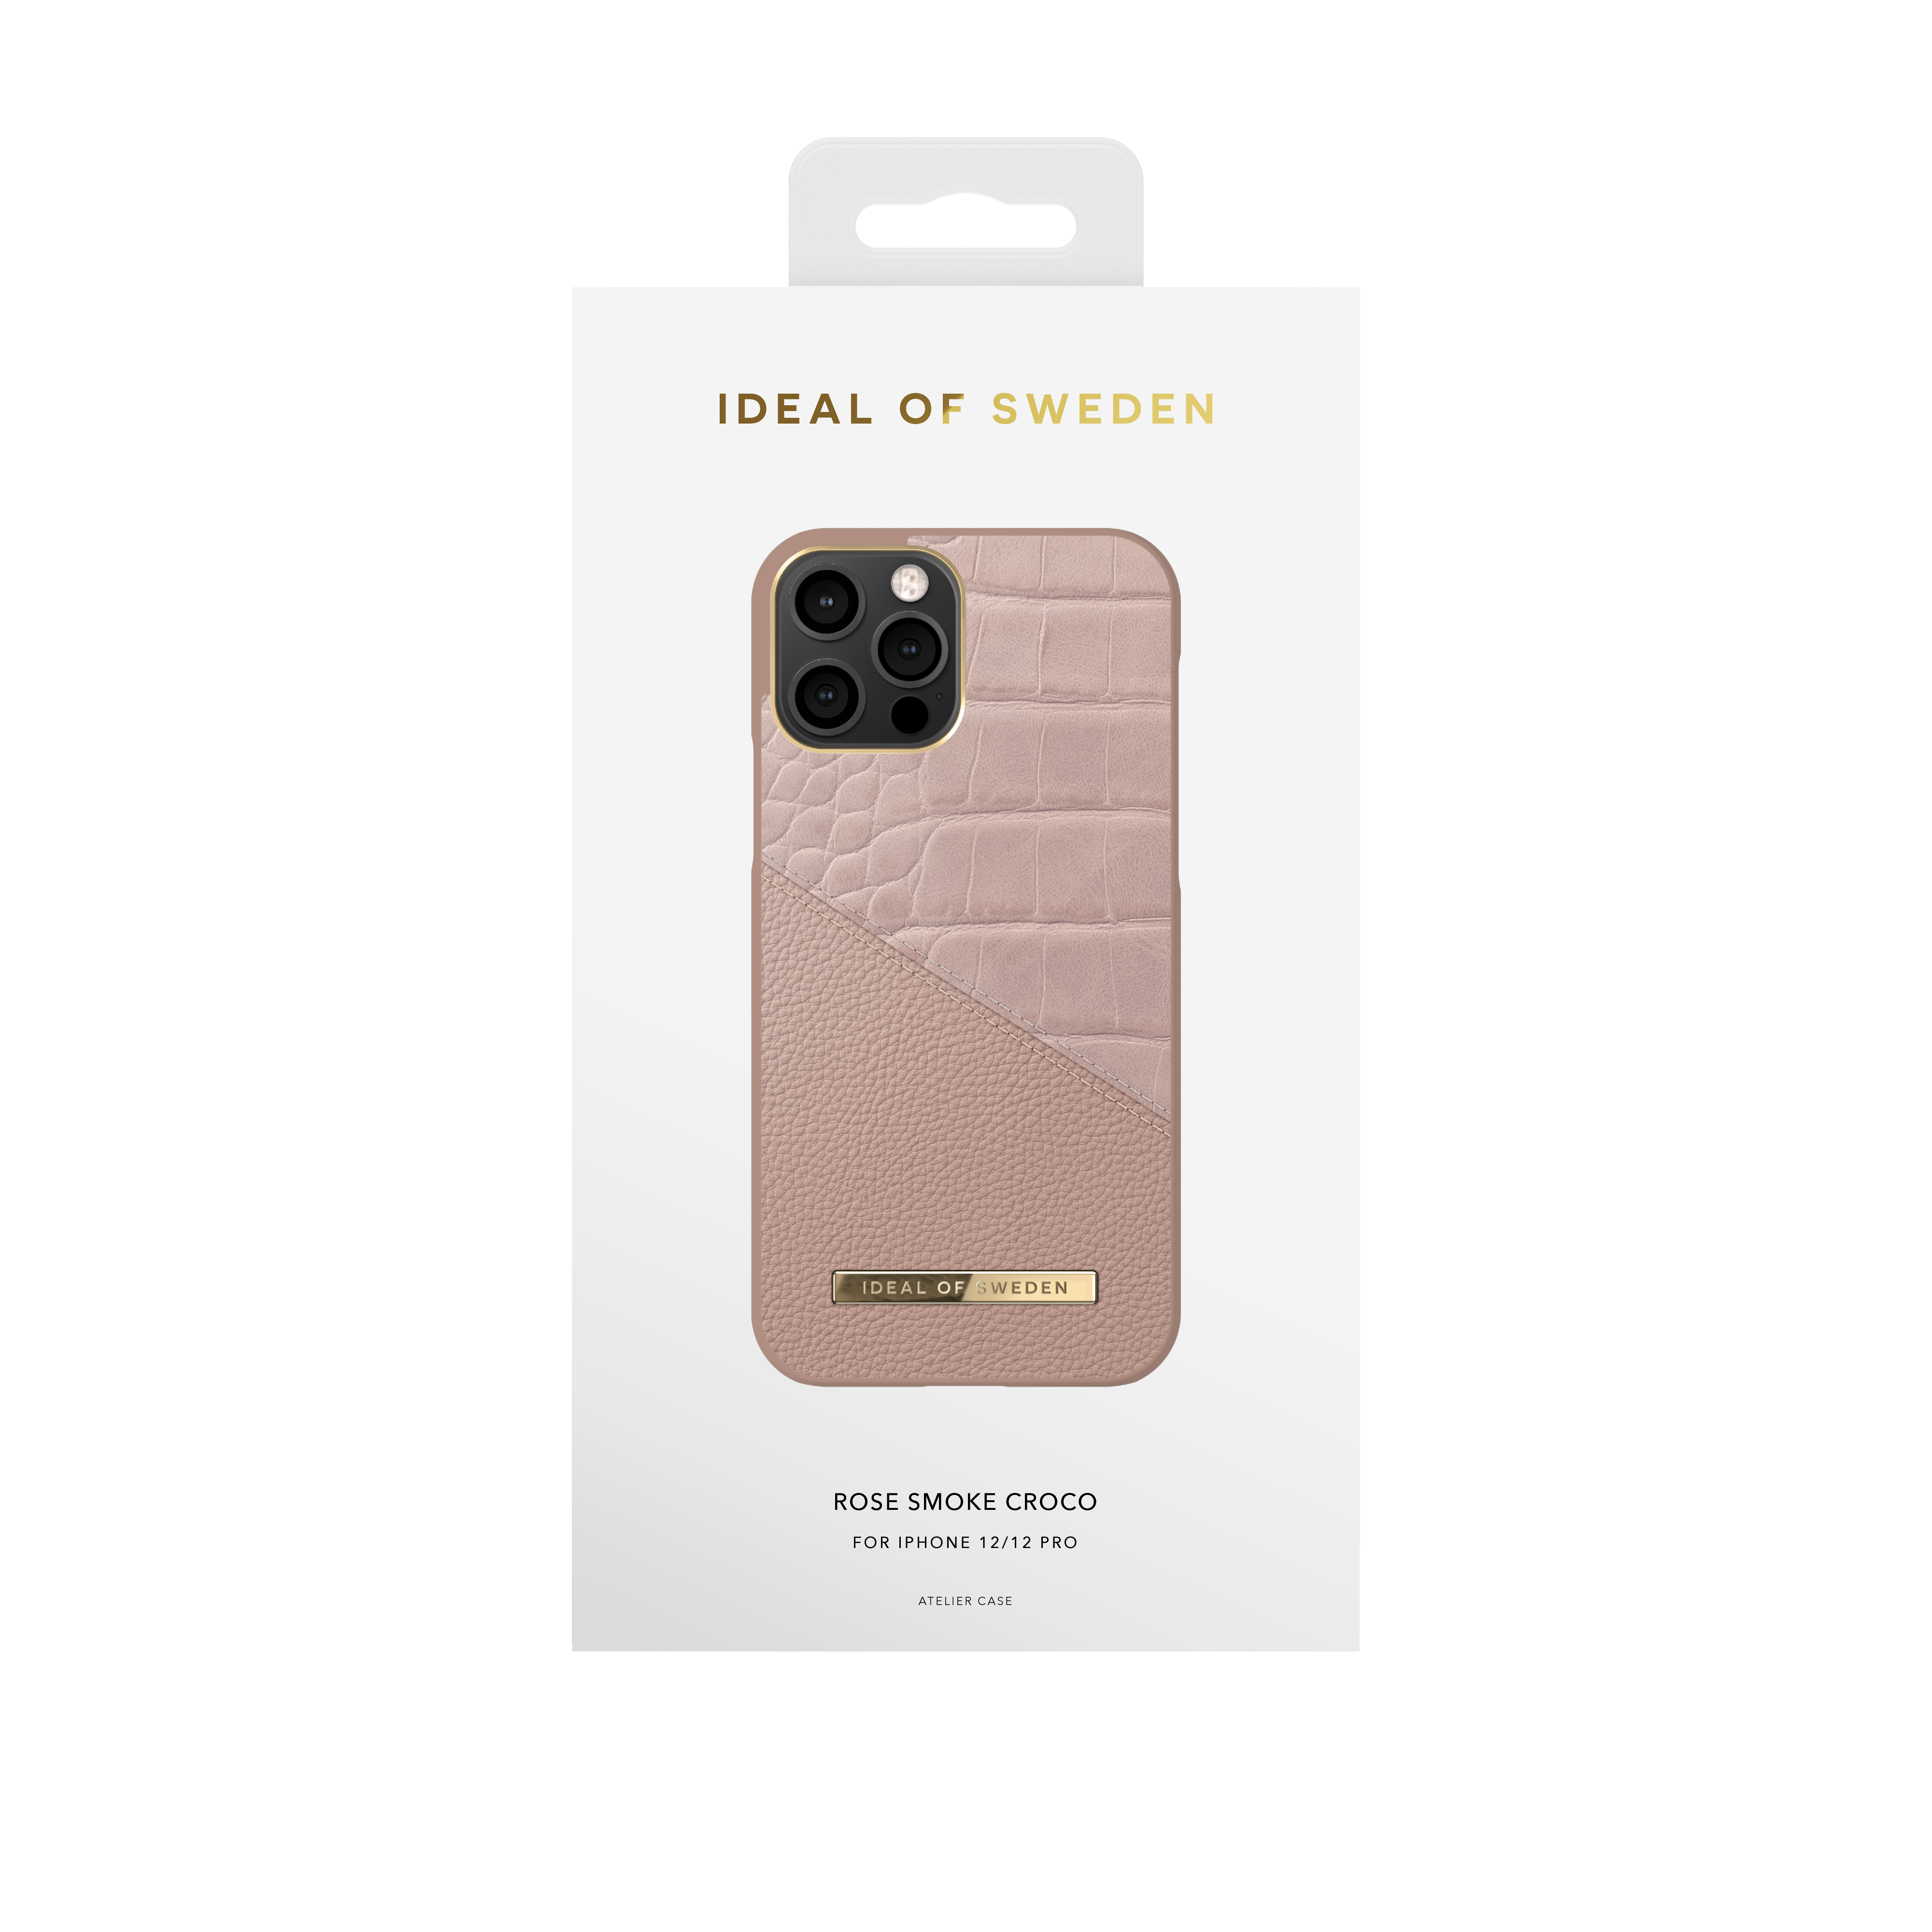 IDEAL OF Smoke IDACSS20-I2061-202, iPhone Pro, Backcover, Croco Apple, 12 12, SWEDEN iPhone Rose